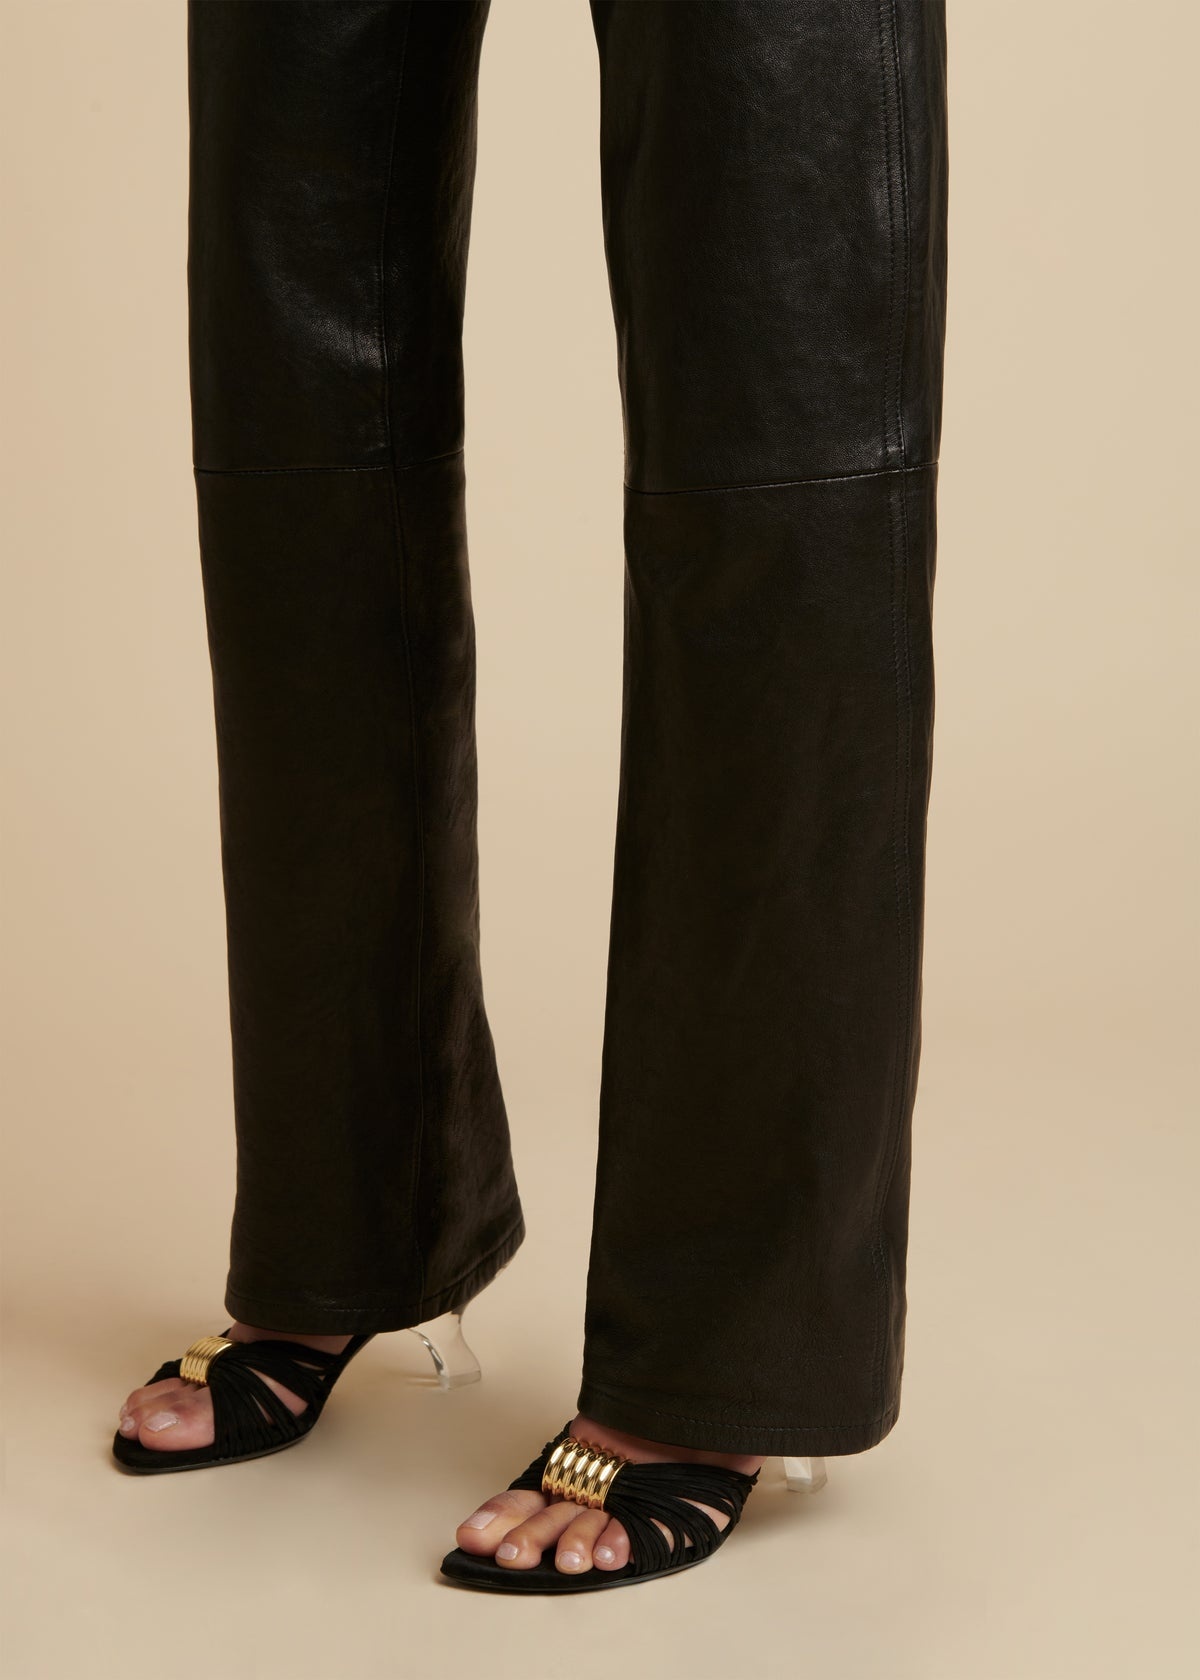 The Danielle Pant in Black Leather - 5